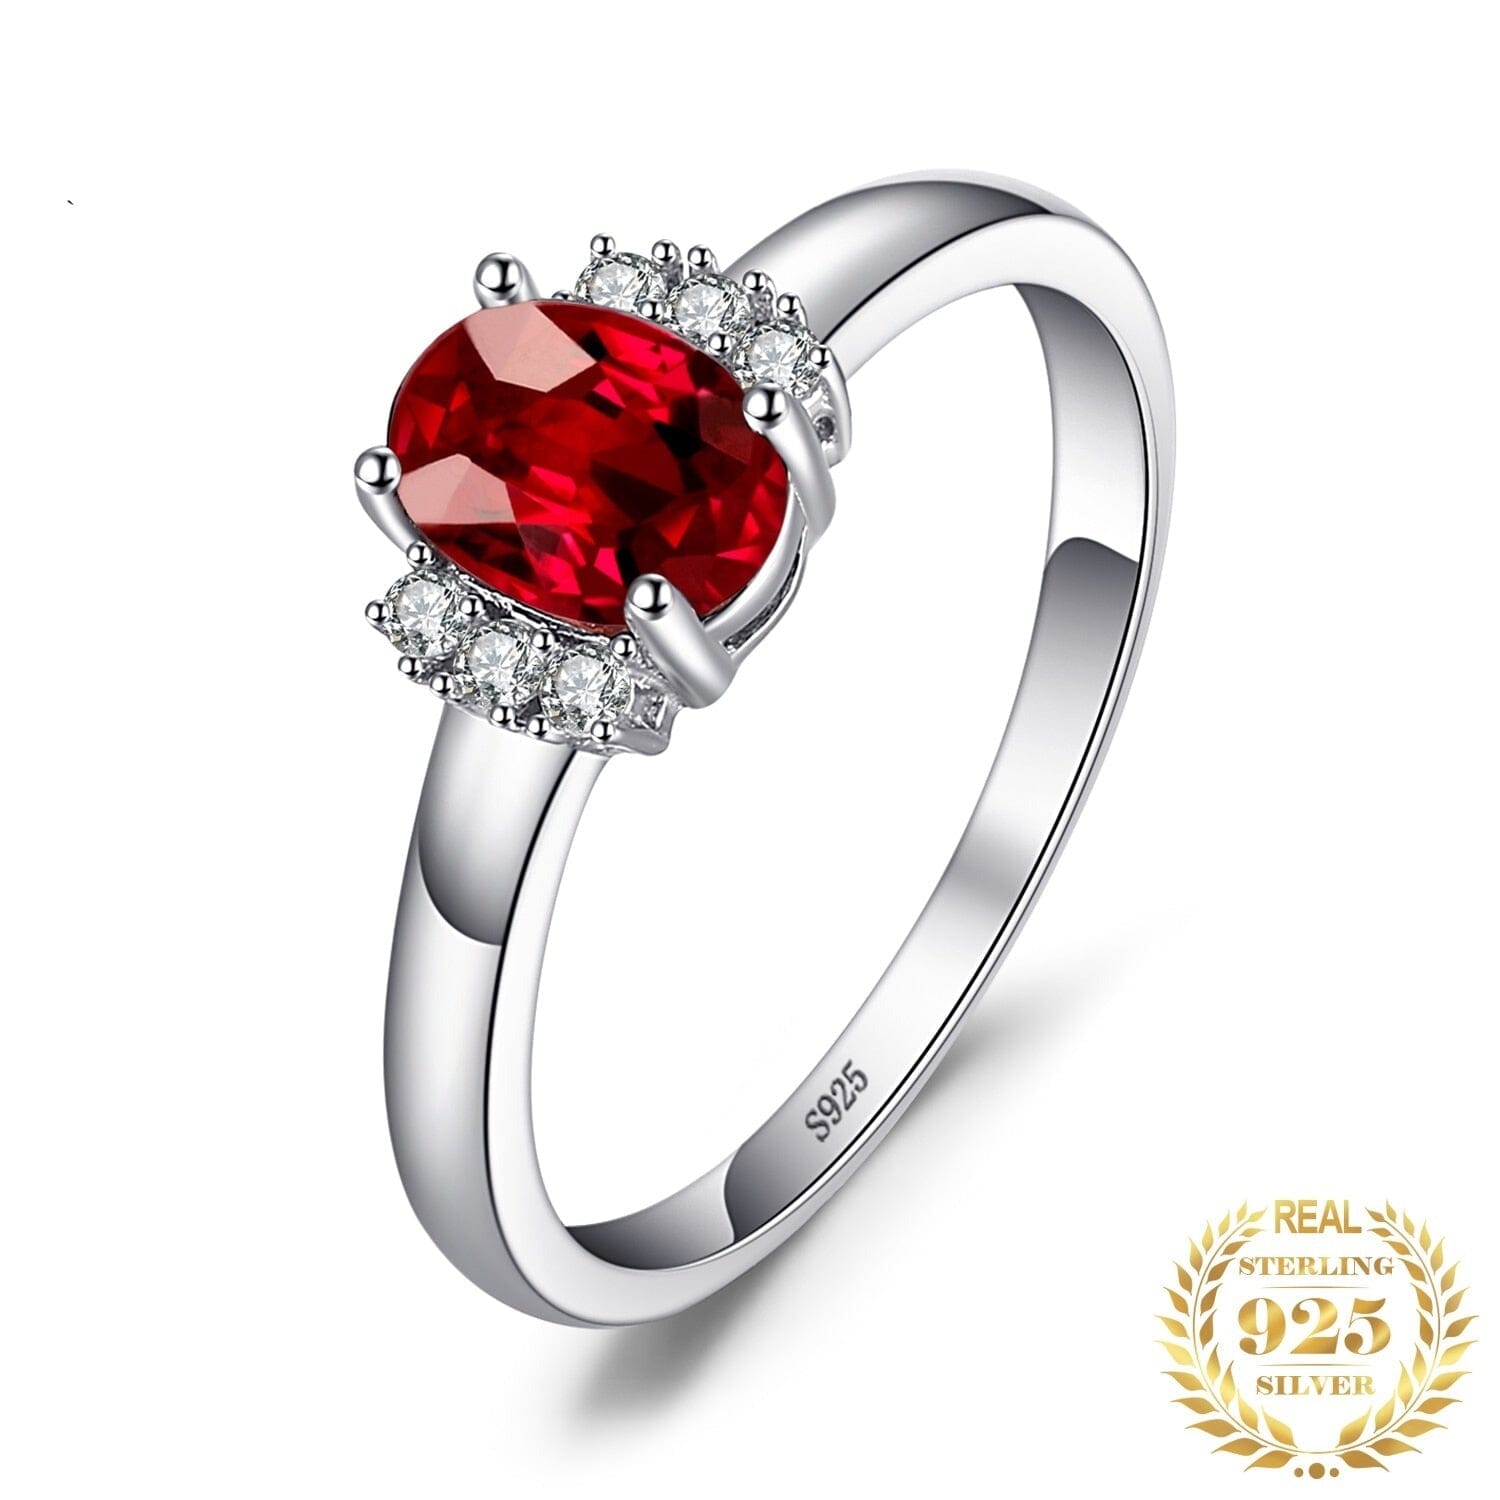 Oval Natural Red Garnet Ring - 925 Sterling SilverRing7